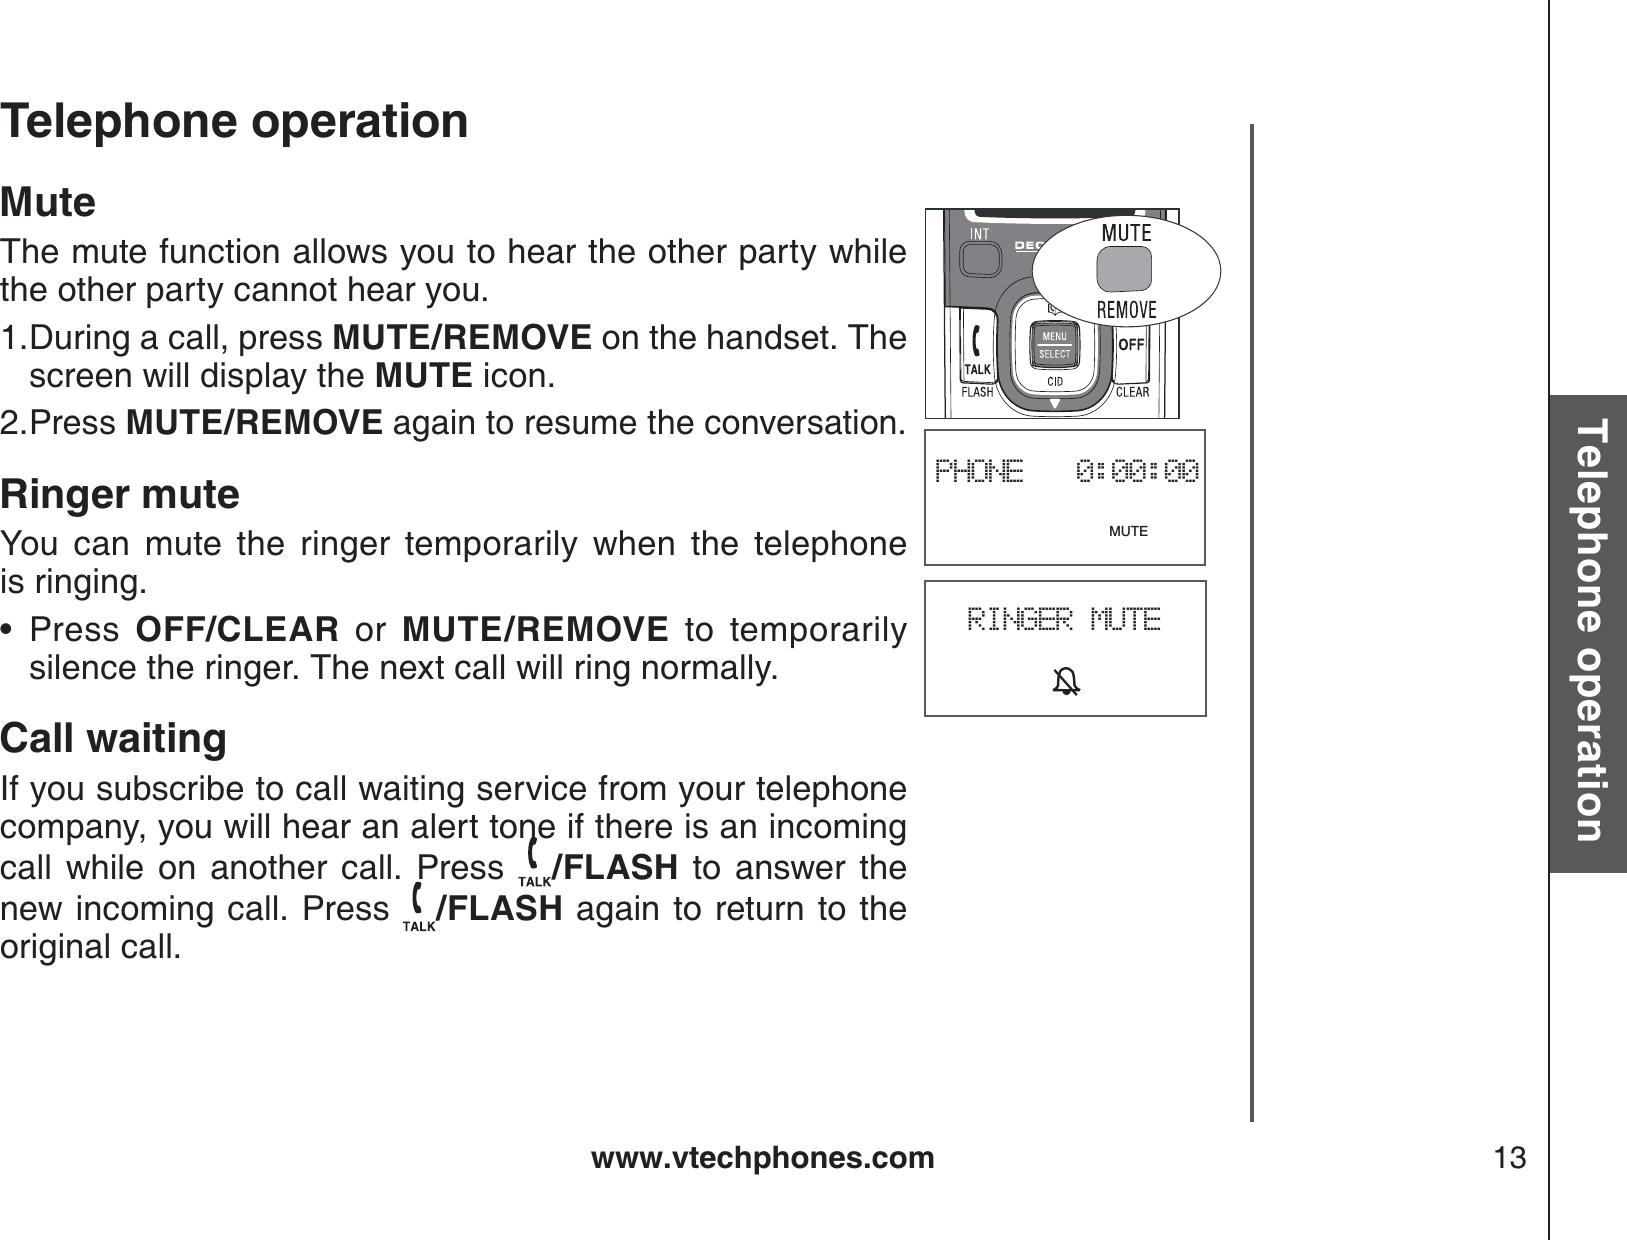 www.vtechphones.com 13Basic operationTelephone operationTelephone operationPHONE   0:00:00                              MUTEMuteThe mute function allows you to hear the other party while the other party cannot hear you.During a call, press MUTE/REMOVE on the handset. The screen will display the MUTE icon.Press MUTE/REMOVE again to resume the conversation.Ringer muteYou can mute the ringer temporarily when the telephone           is ringing.Press OFF/CLEAR or MUTE/REMOVE to temporarily silence the ringer. The next call will ring normally.Call waitingIf you subscribe to call waiting service from your telephone company, you will hear an alert tone if there is an incoming call while on another call. Press  /FLASH to answer the new incoming call. Press  /FLASH again to return to theoriginal call.1.2.•RINGER MUTE